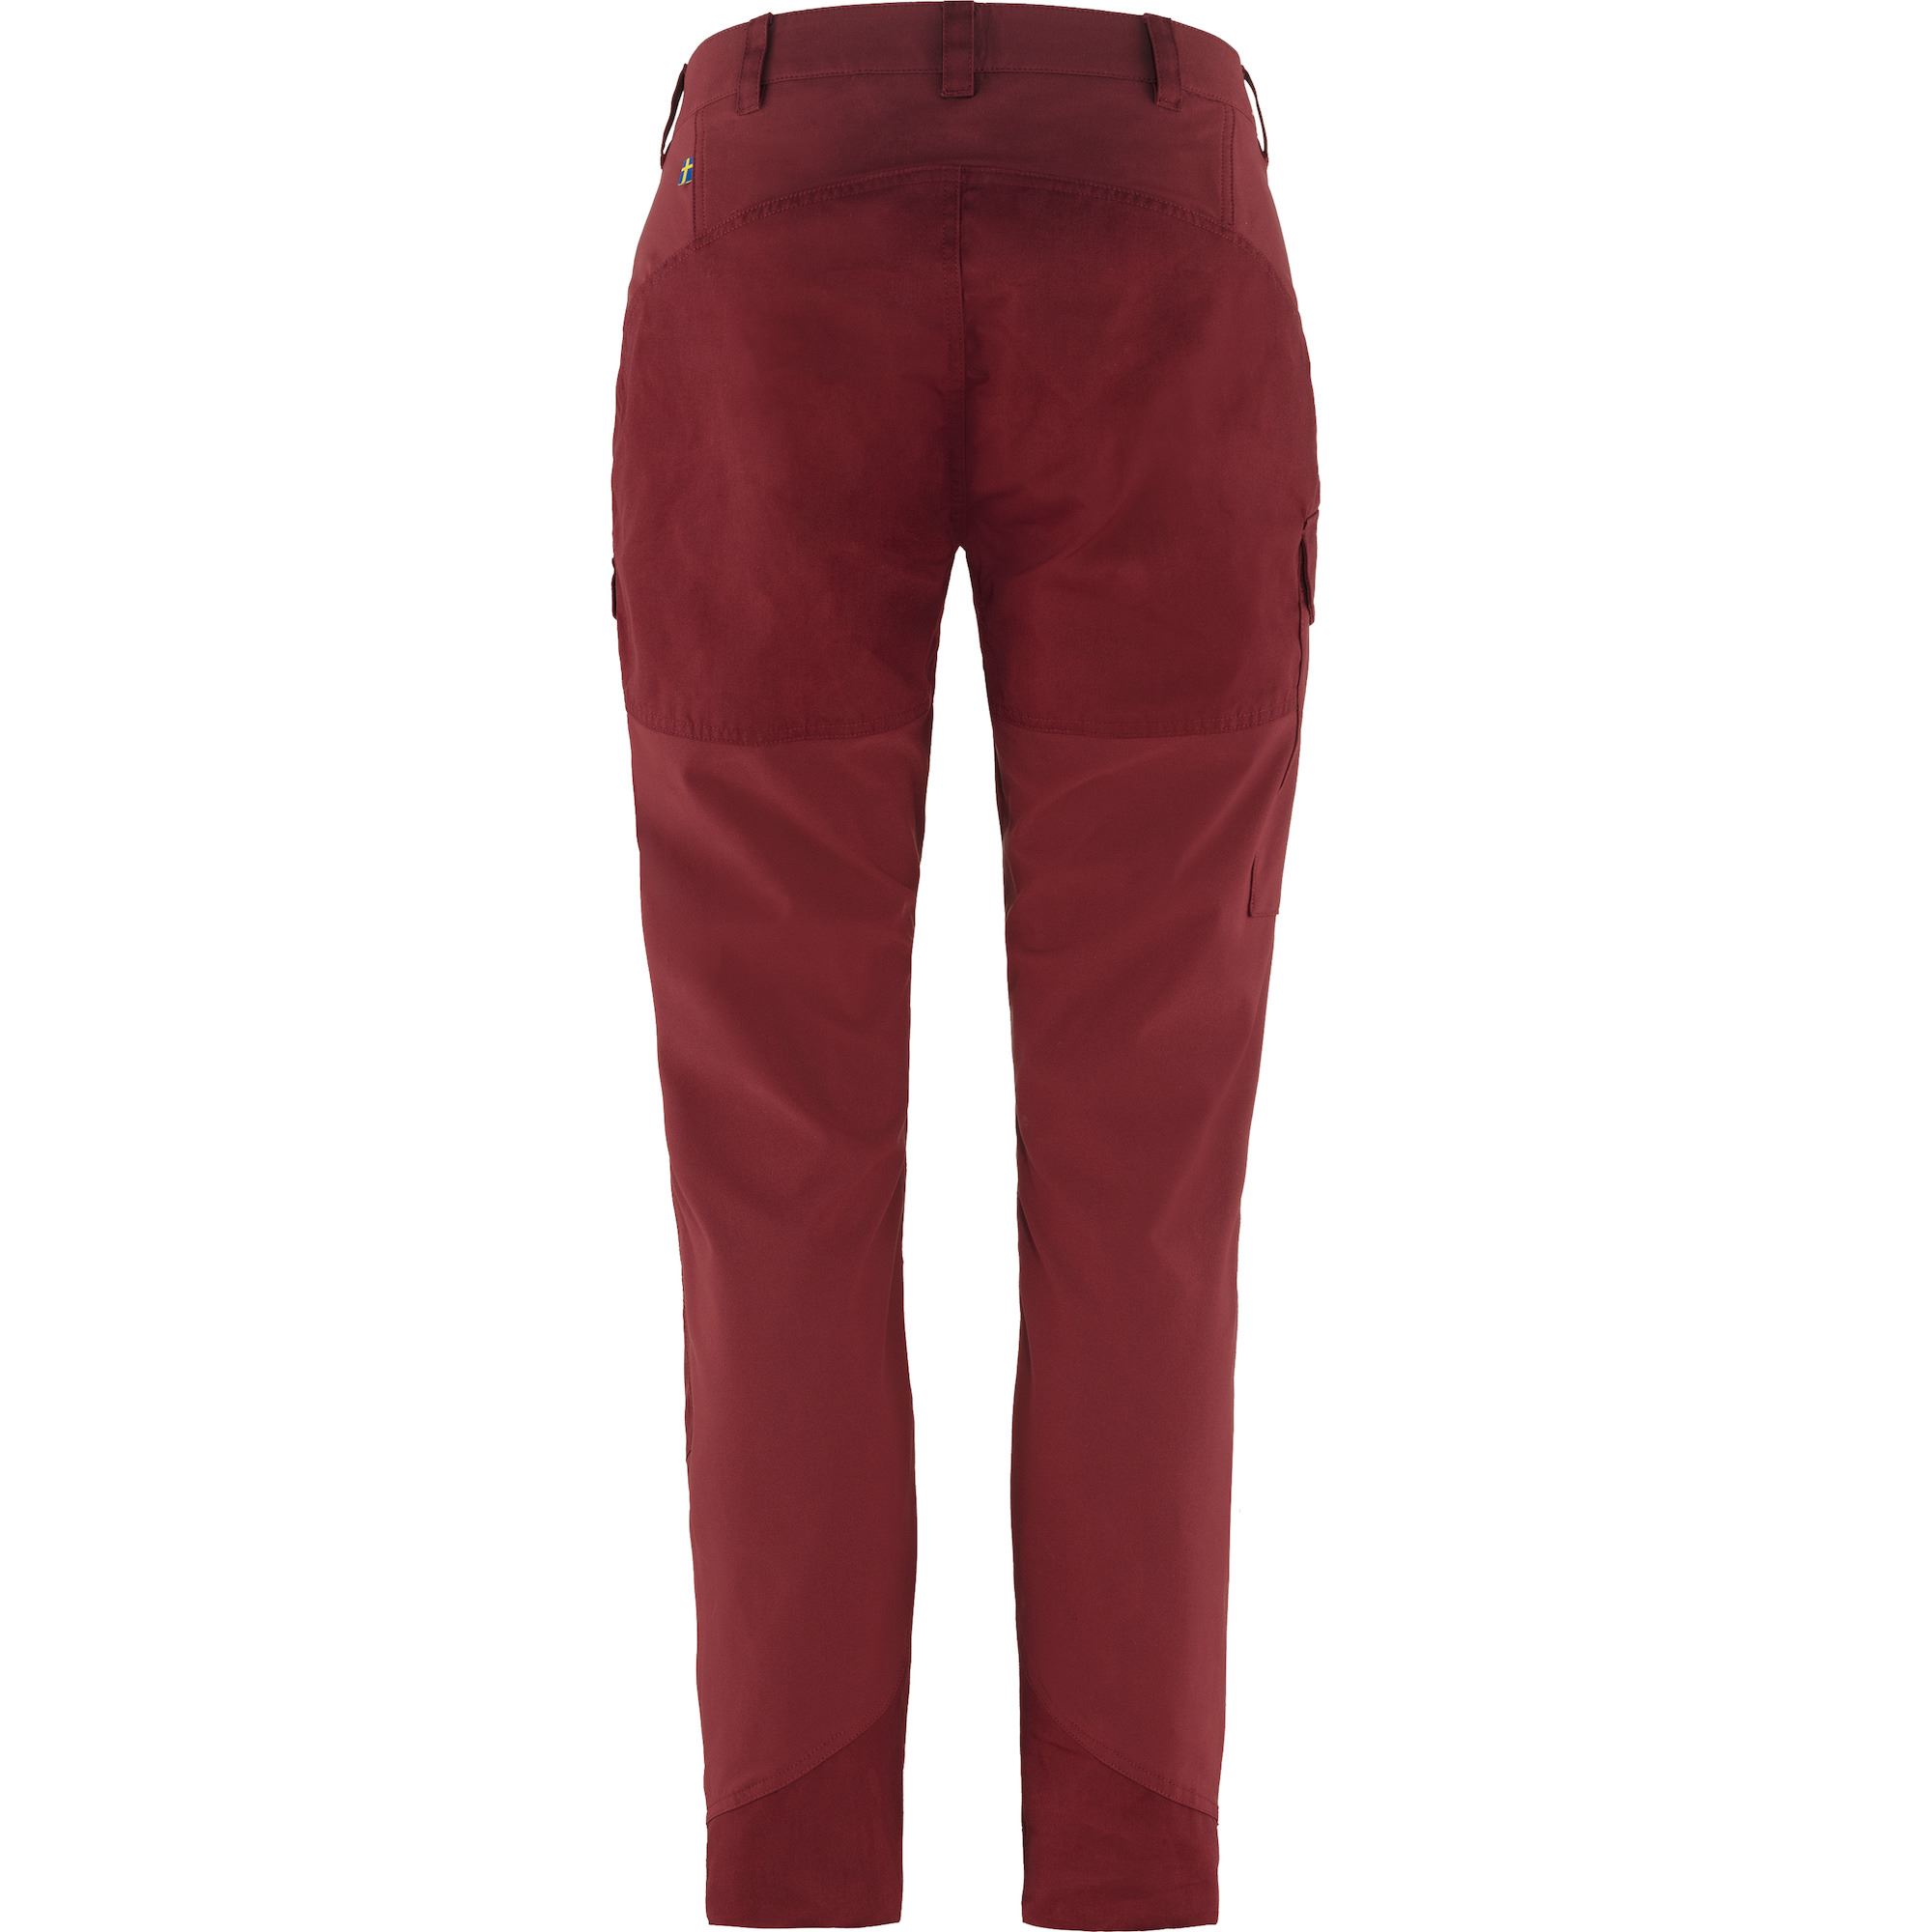 Integration Pickering uvidenhed Nikka Trousers Curved W